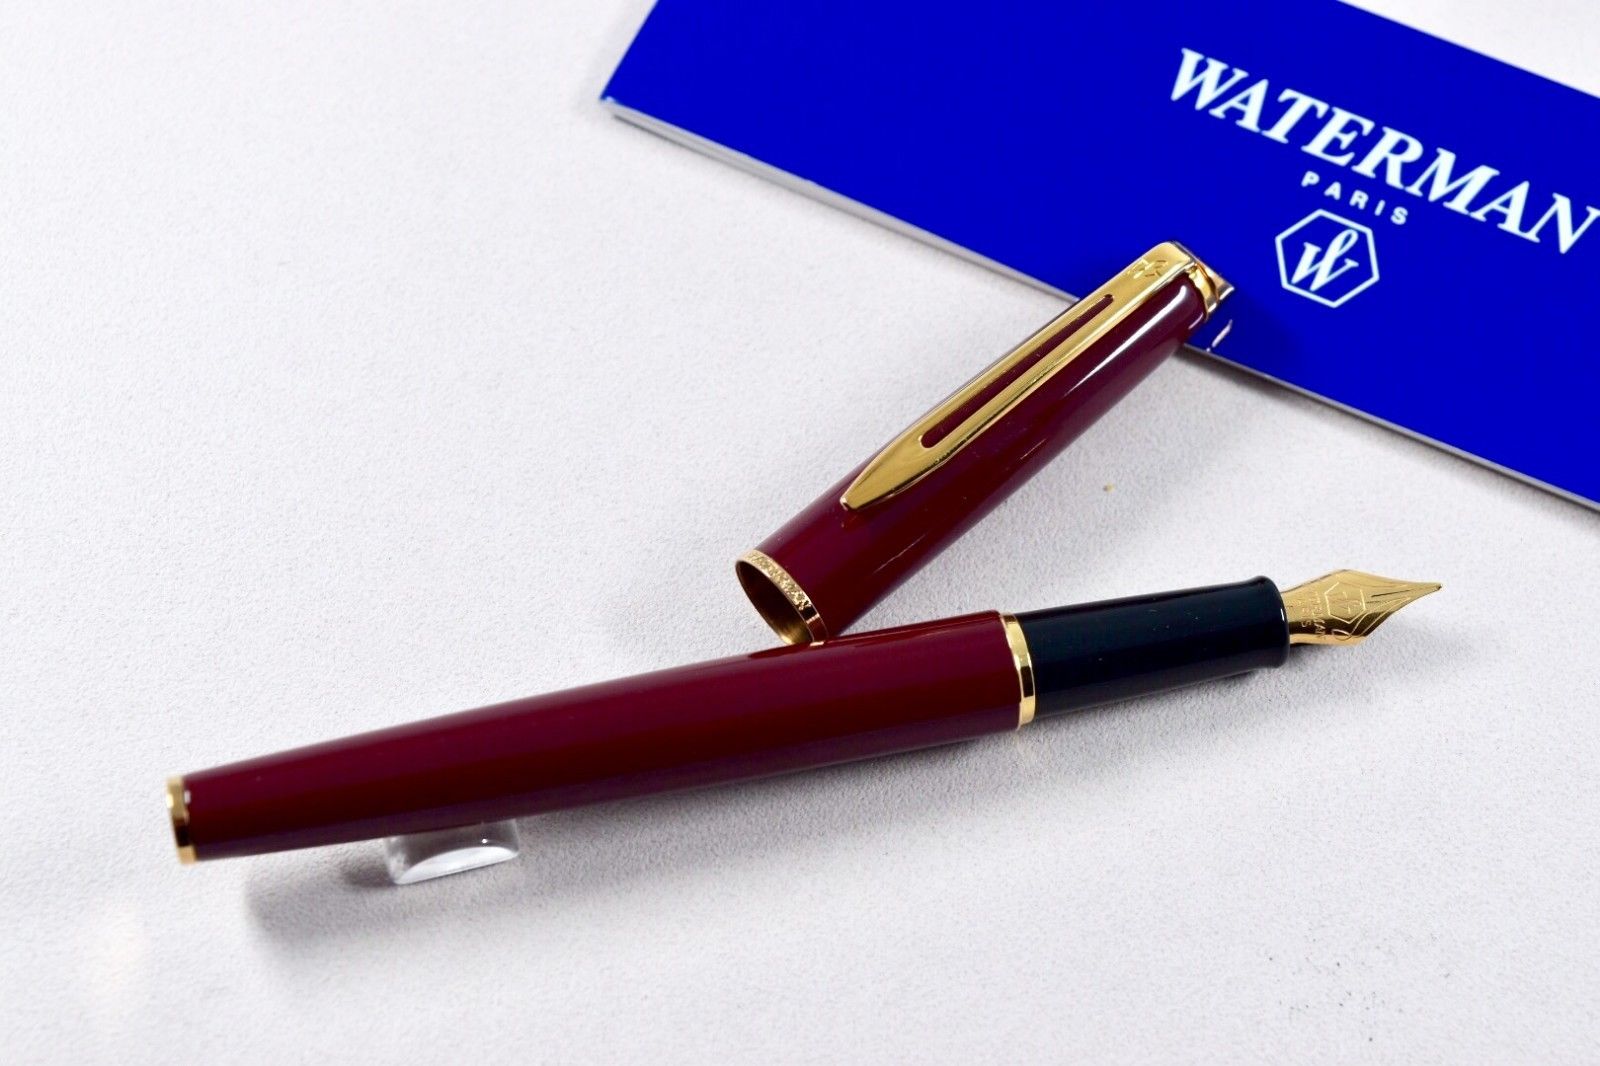 NOS Match to Fountain Pen Waterman Exclusive Red Bordeaux Marble Ballpoint Pen